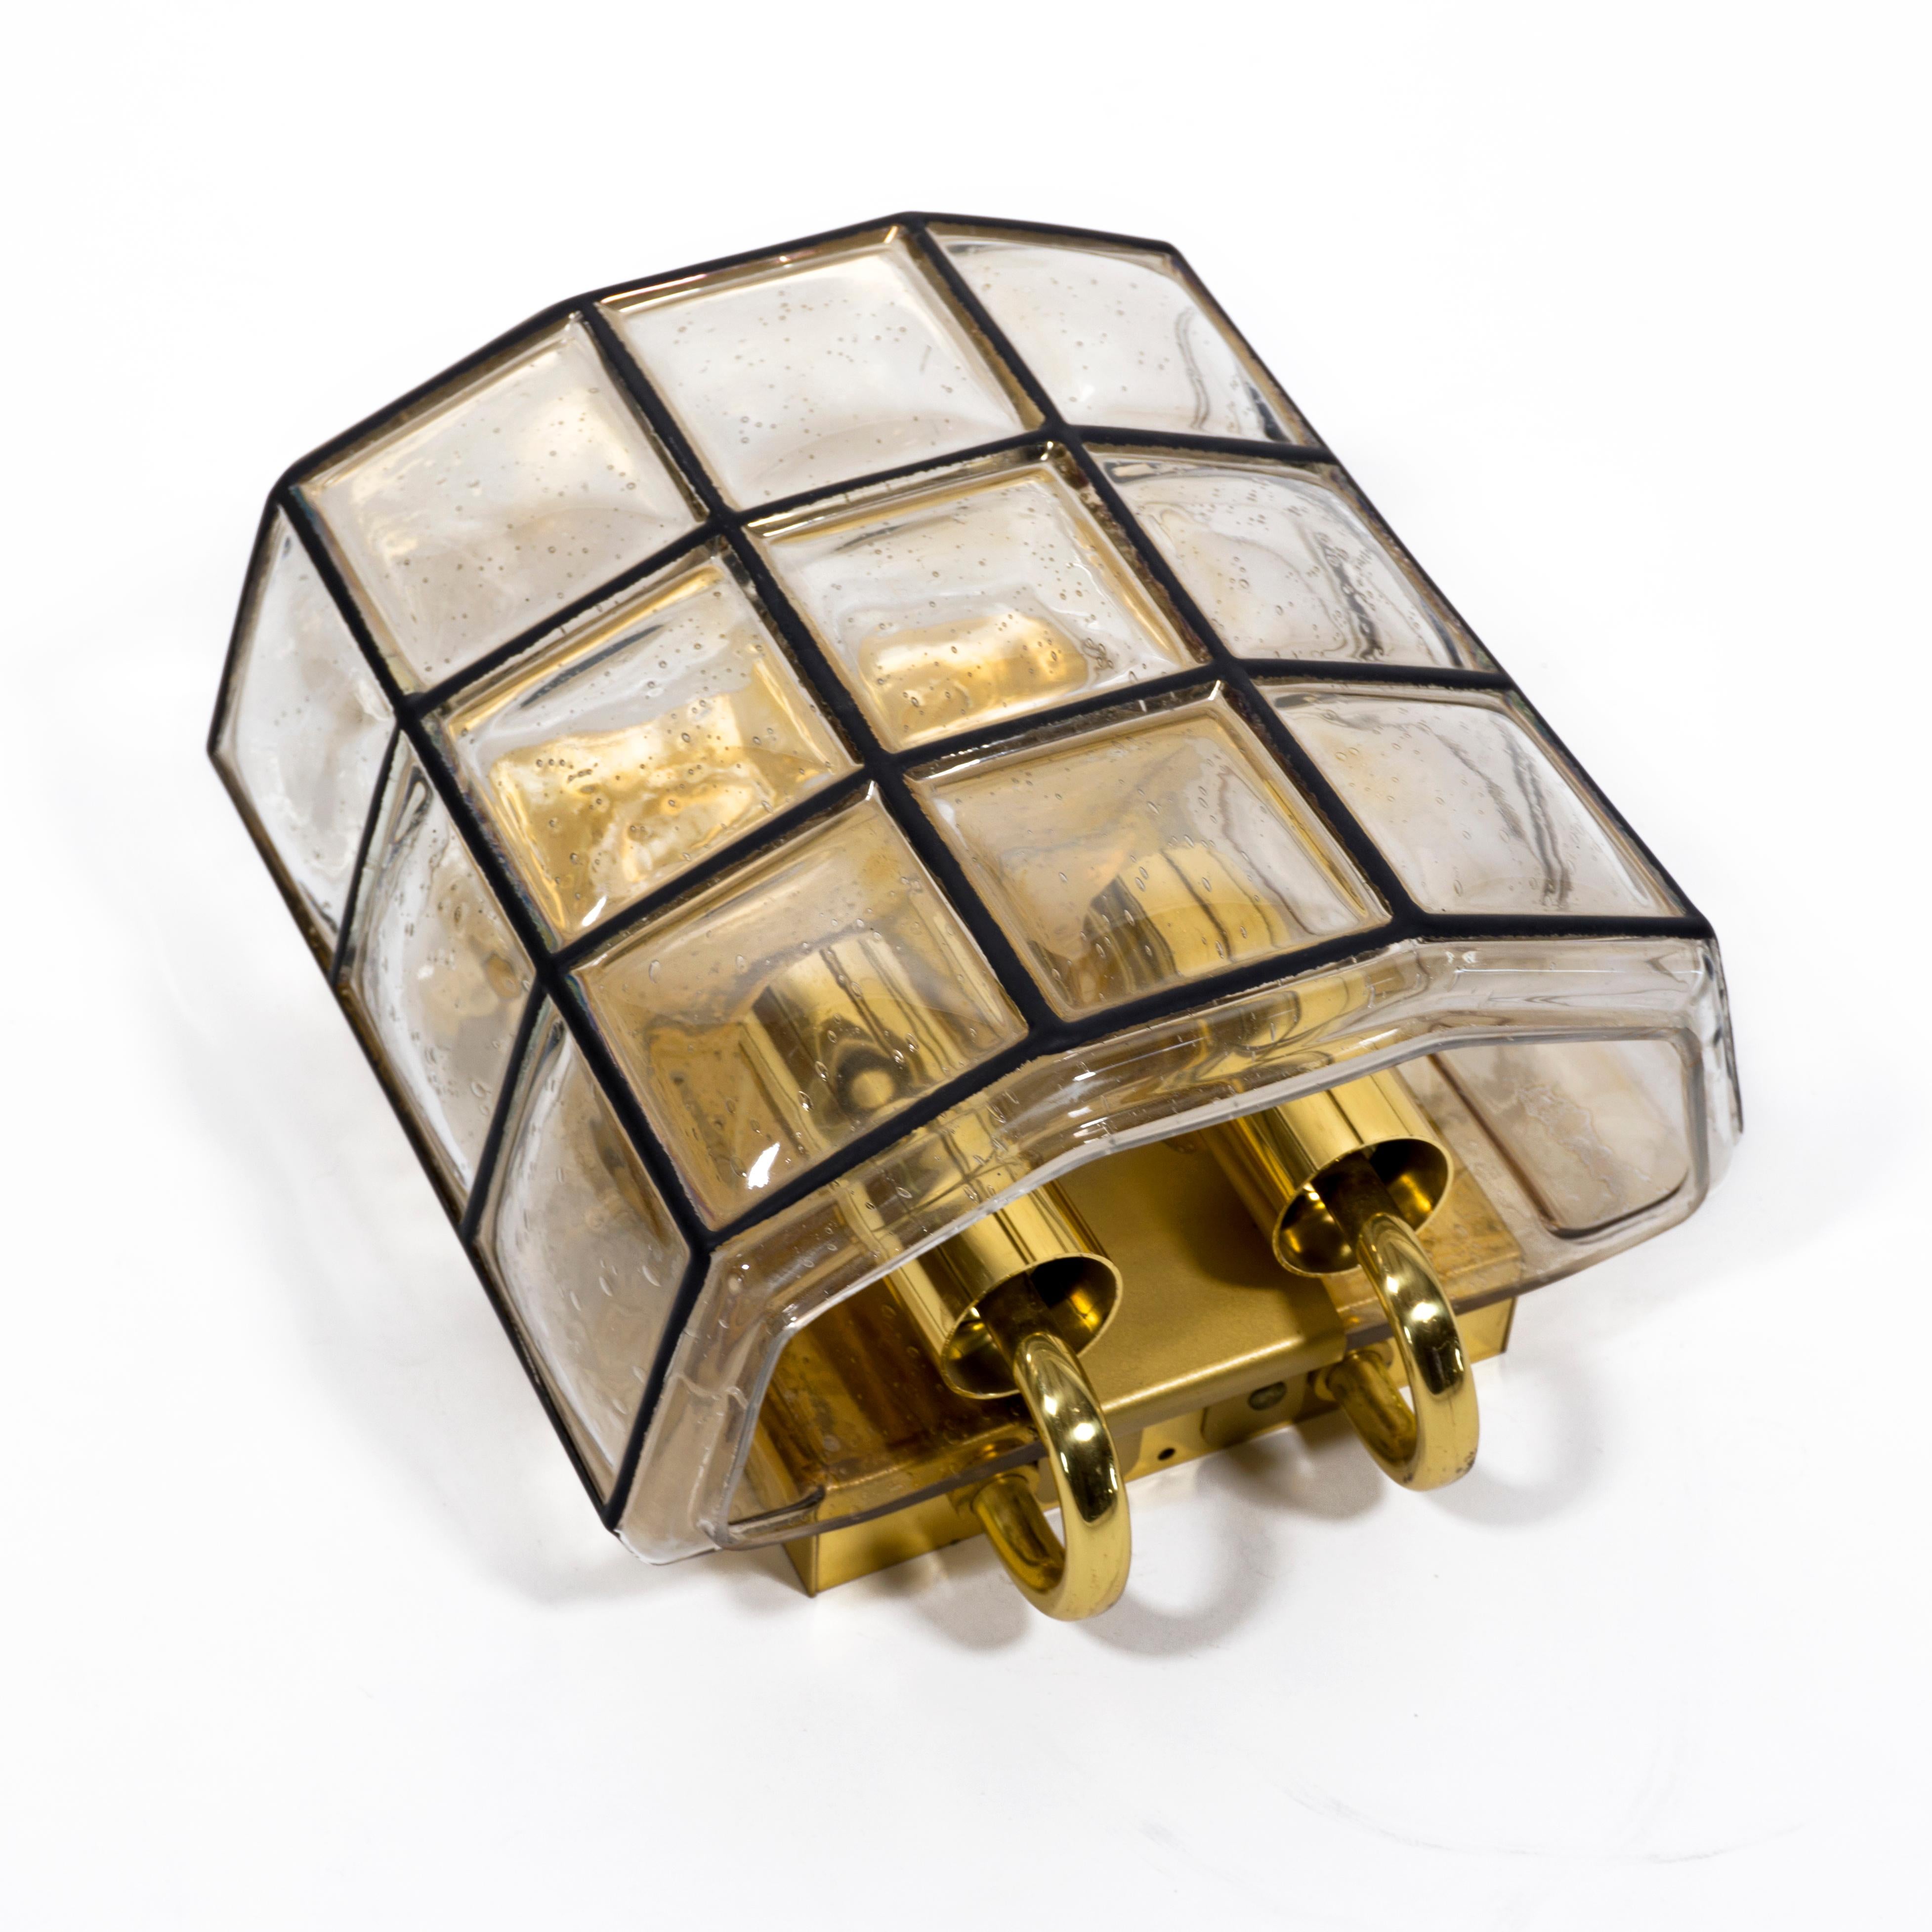 Elegant Limburg double socket wall light  wall sconce made of glass, iron and brass from the 1960s. 
The lamp has a shade made of iron and textured bubble glass. The hand-blown glass bulges slightly out of each individual iron square which gives the